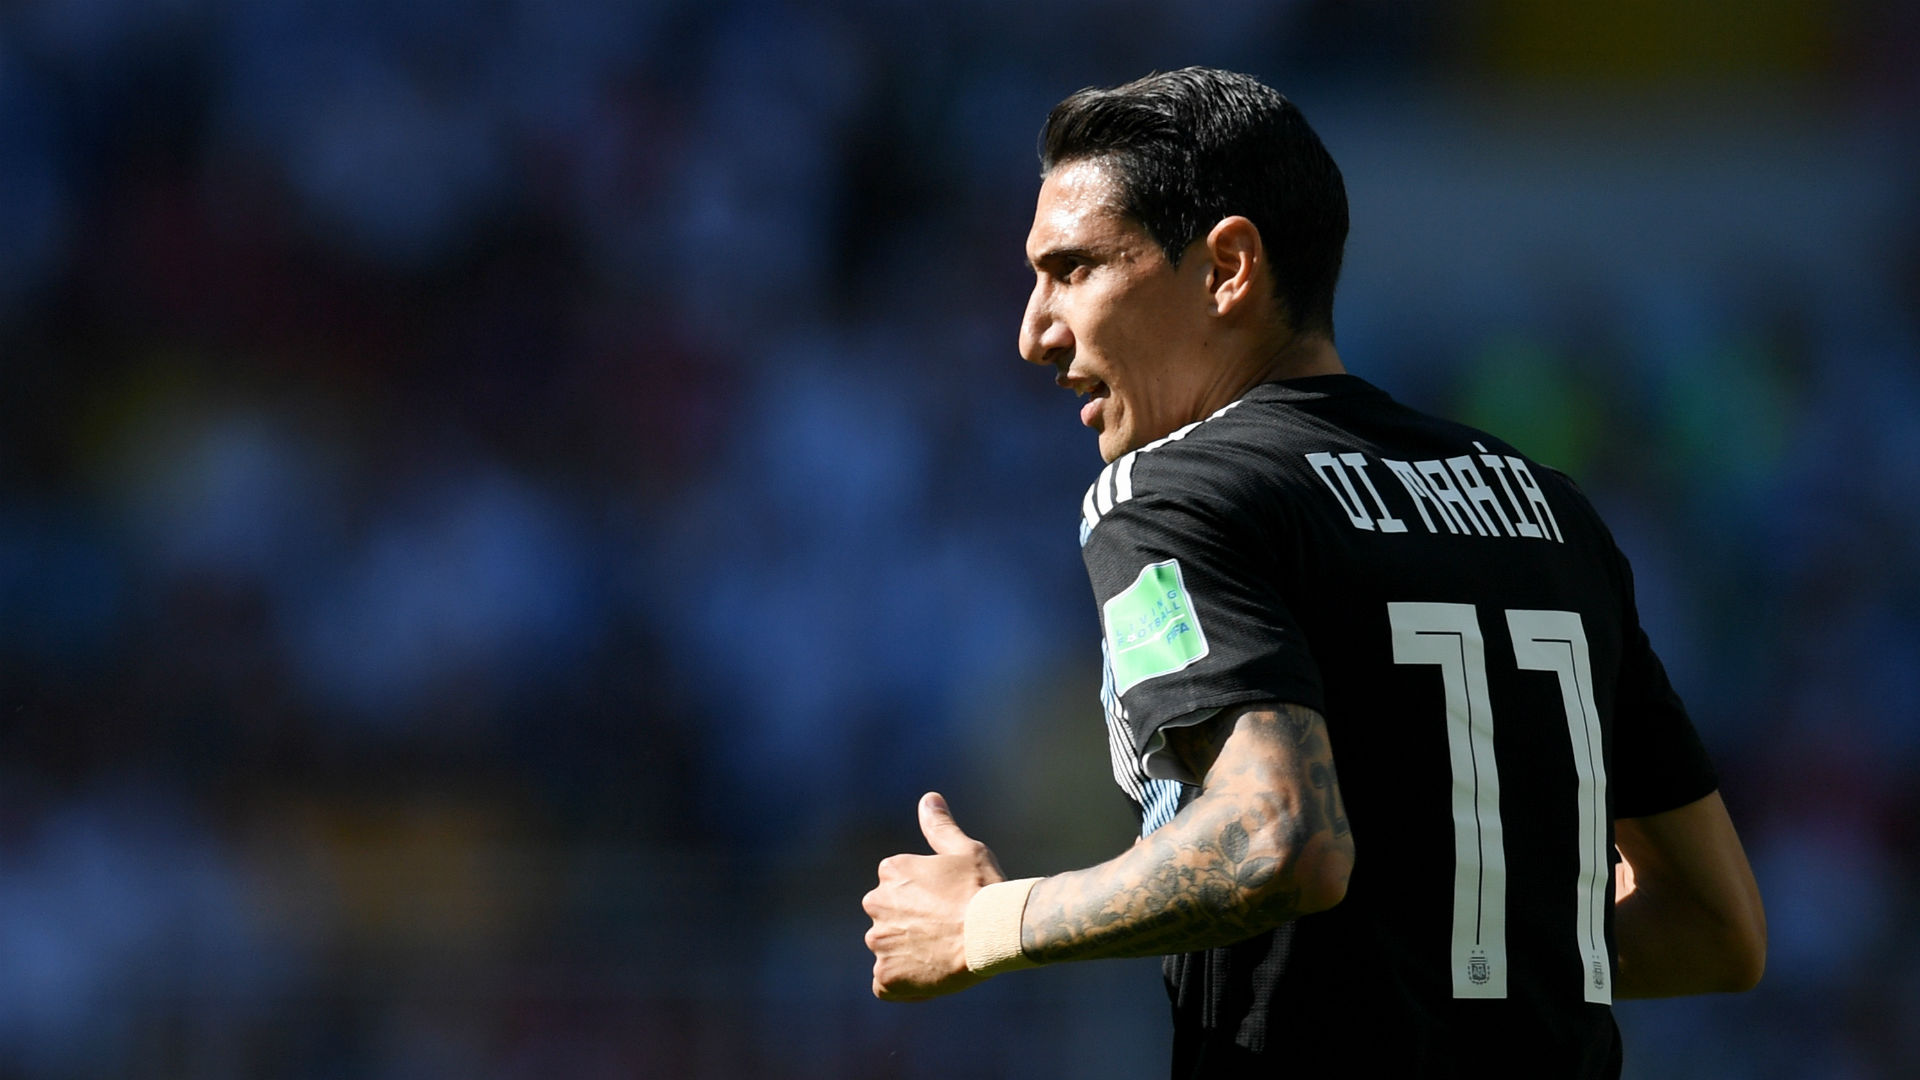 World Cup 2018: Angel Di Maria reveals how Real Madrid stopped him from playing in 2014 final for Argentina